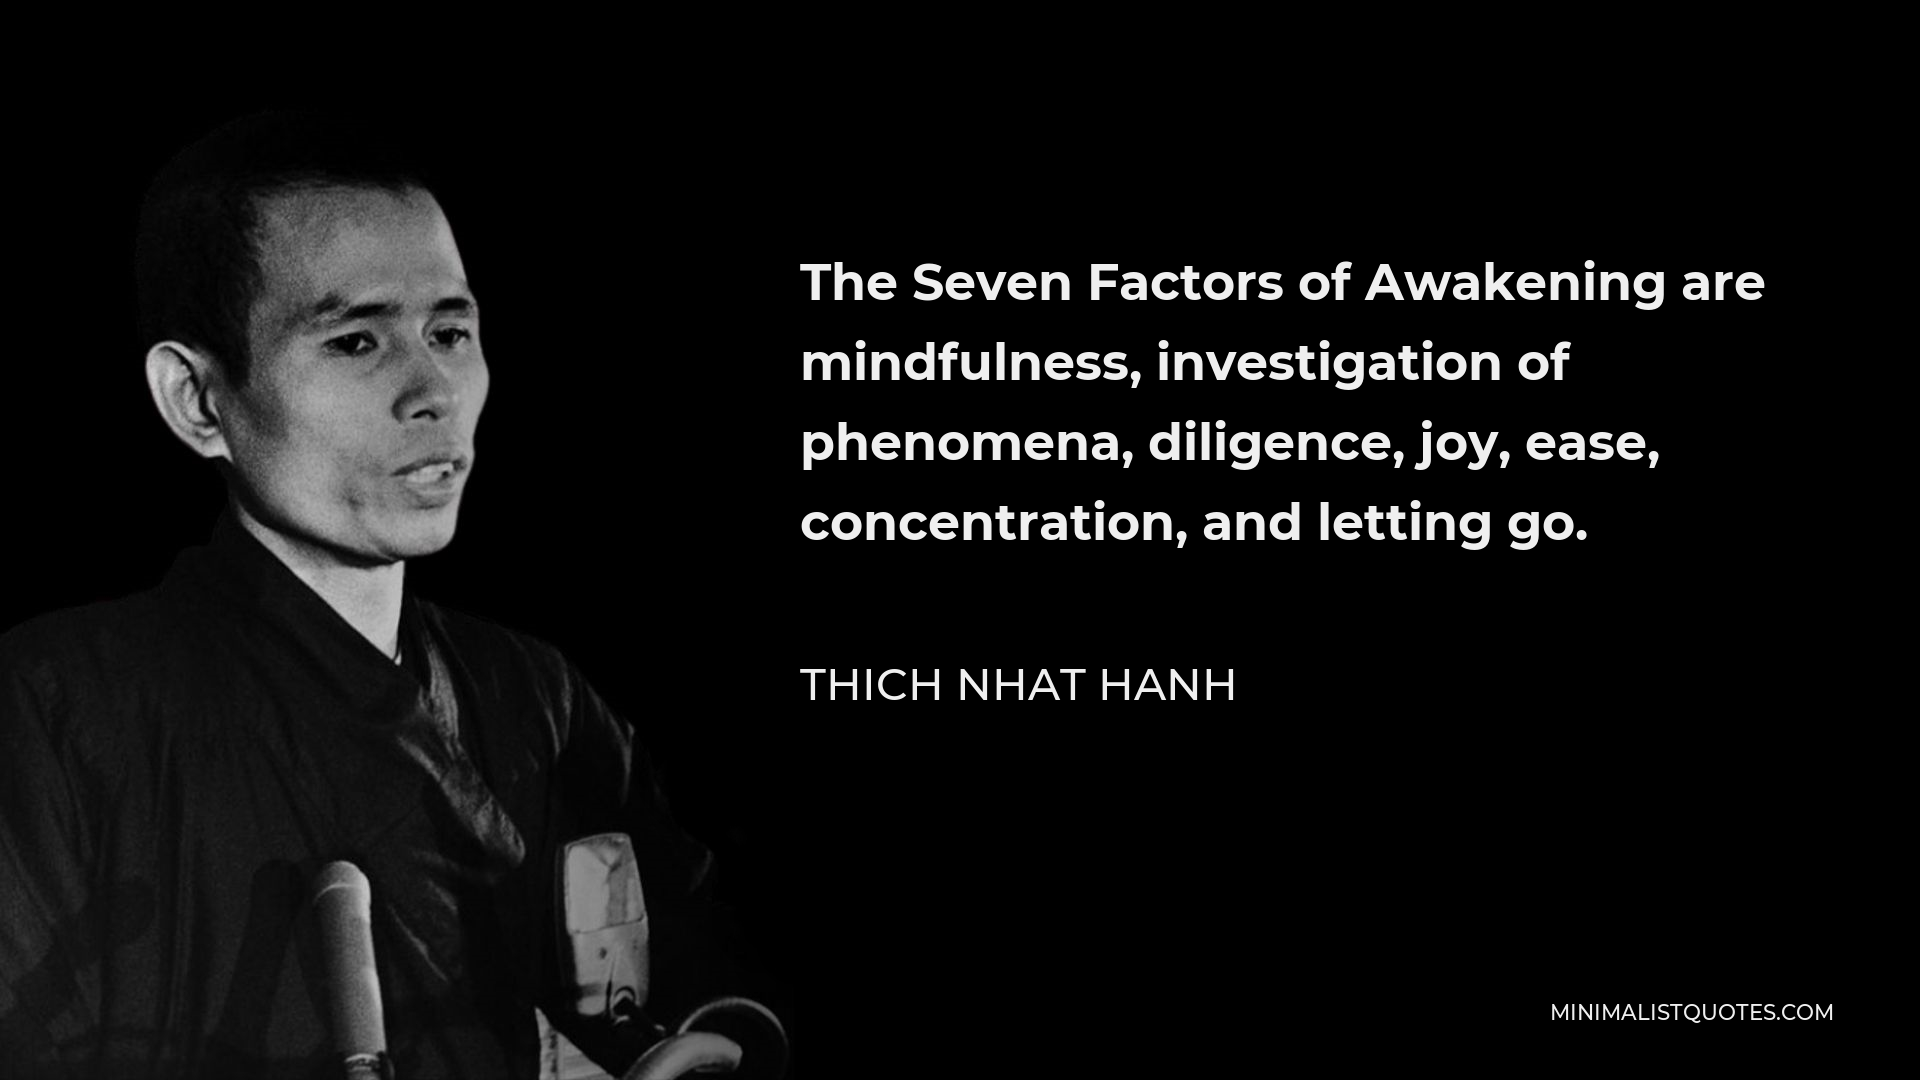 Thich Nhat Hanh Quote - The Seven Factors of Awakening are mindfulness, investigation of phenomena, diligence, joy, ease, concentration, and letting go.